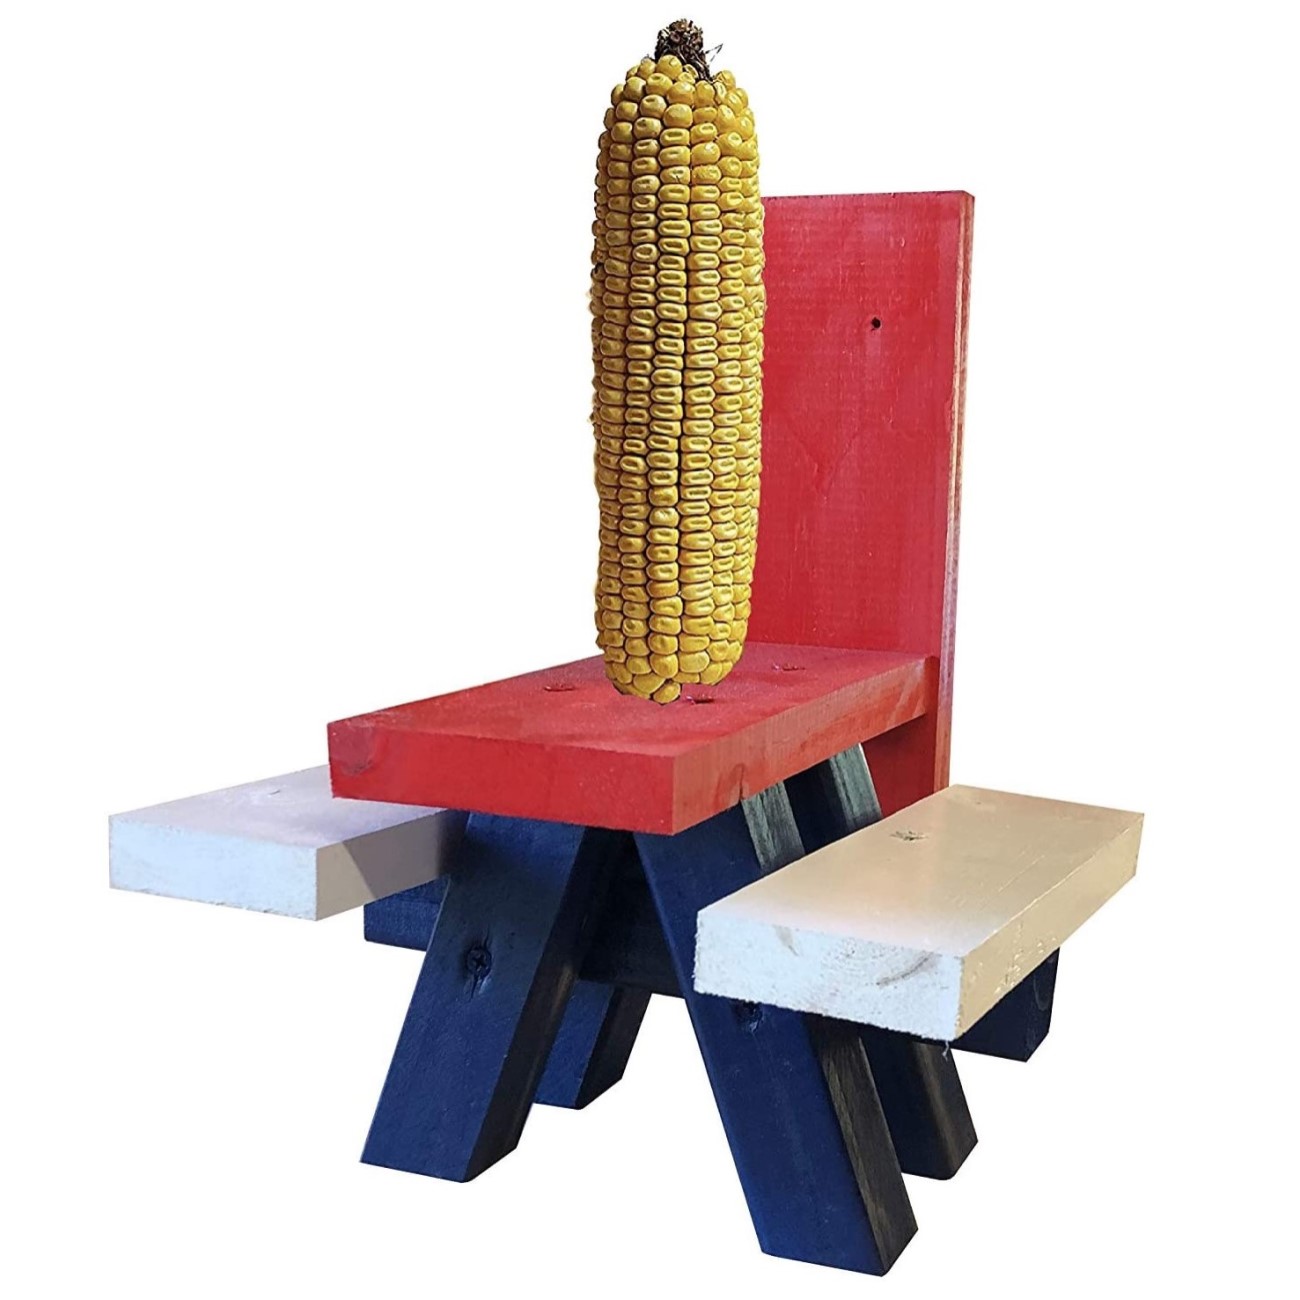 SquirrelSupply.com - Squirrel-Picnic-Table-Feeder-–-Red-White-and-Blue-in-Color-Large-Size-Made-in-The-USA-by-Local-Craftsmen-Bench-Feeding-for-Squirrels-Corn-Cob-Holder-Includes-1